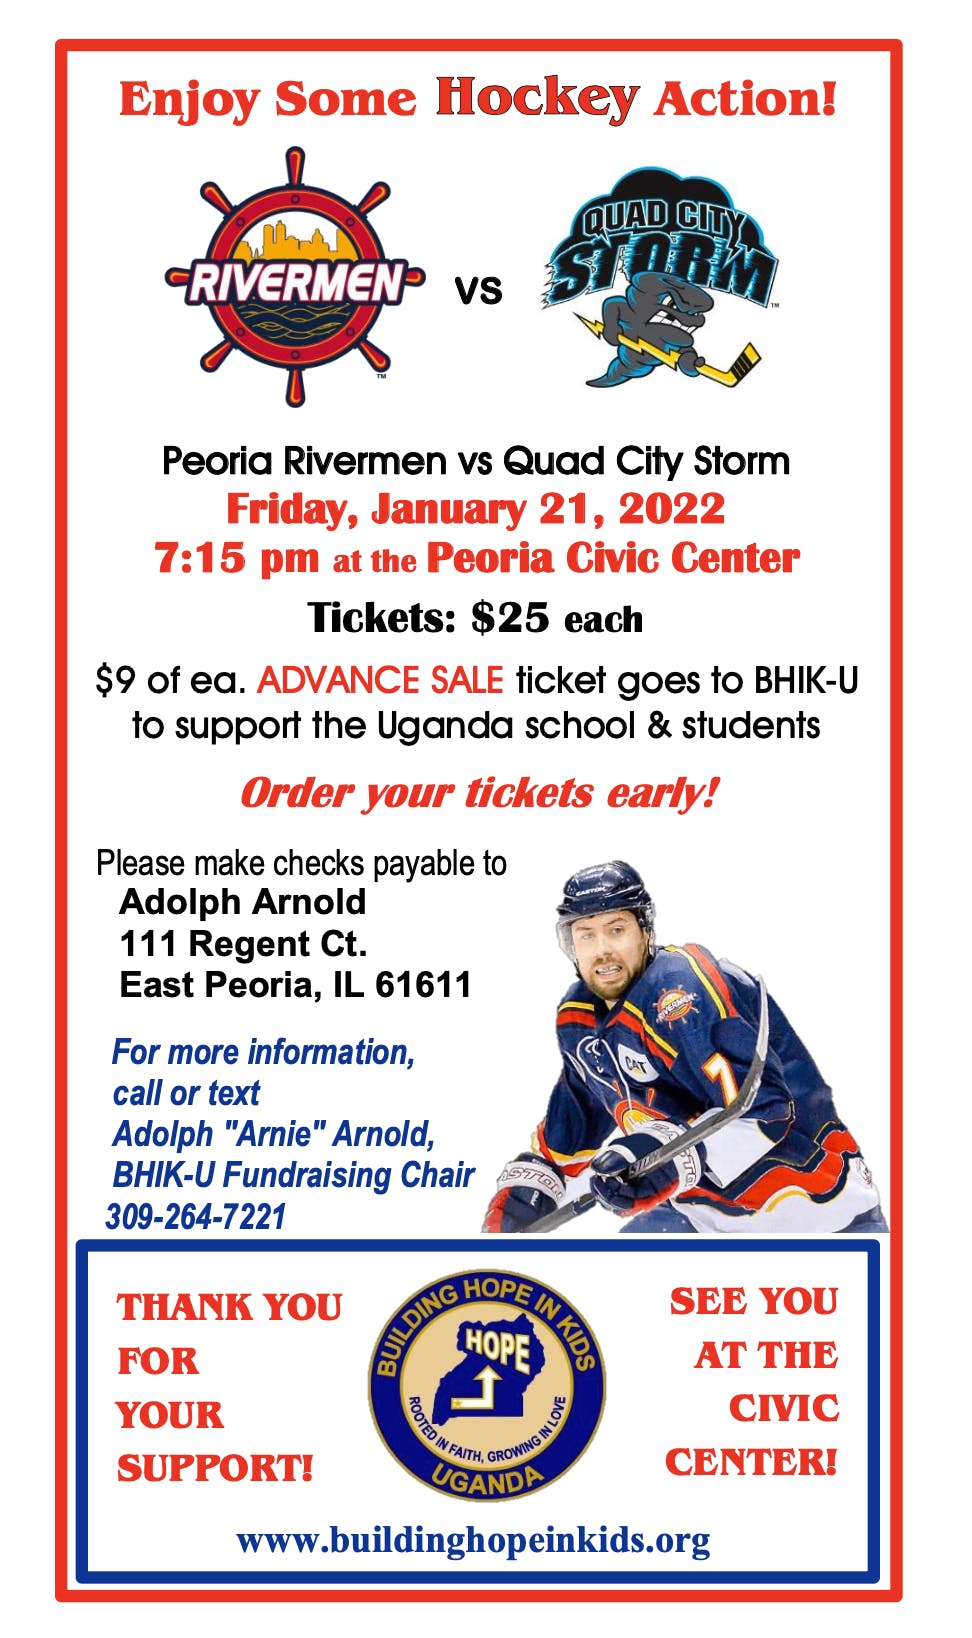 Come watch the Rivermen and support BHIK on January 21 2022 order tickets through Adolph Arnold at 309-264-7221 $25/each